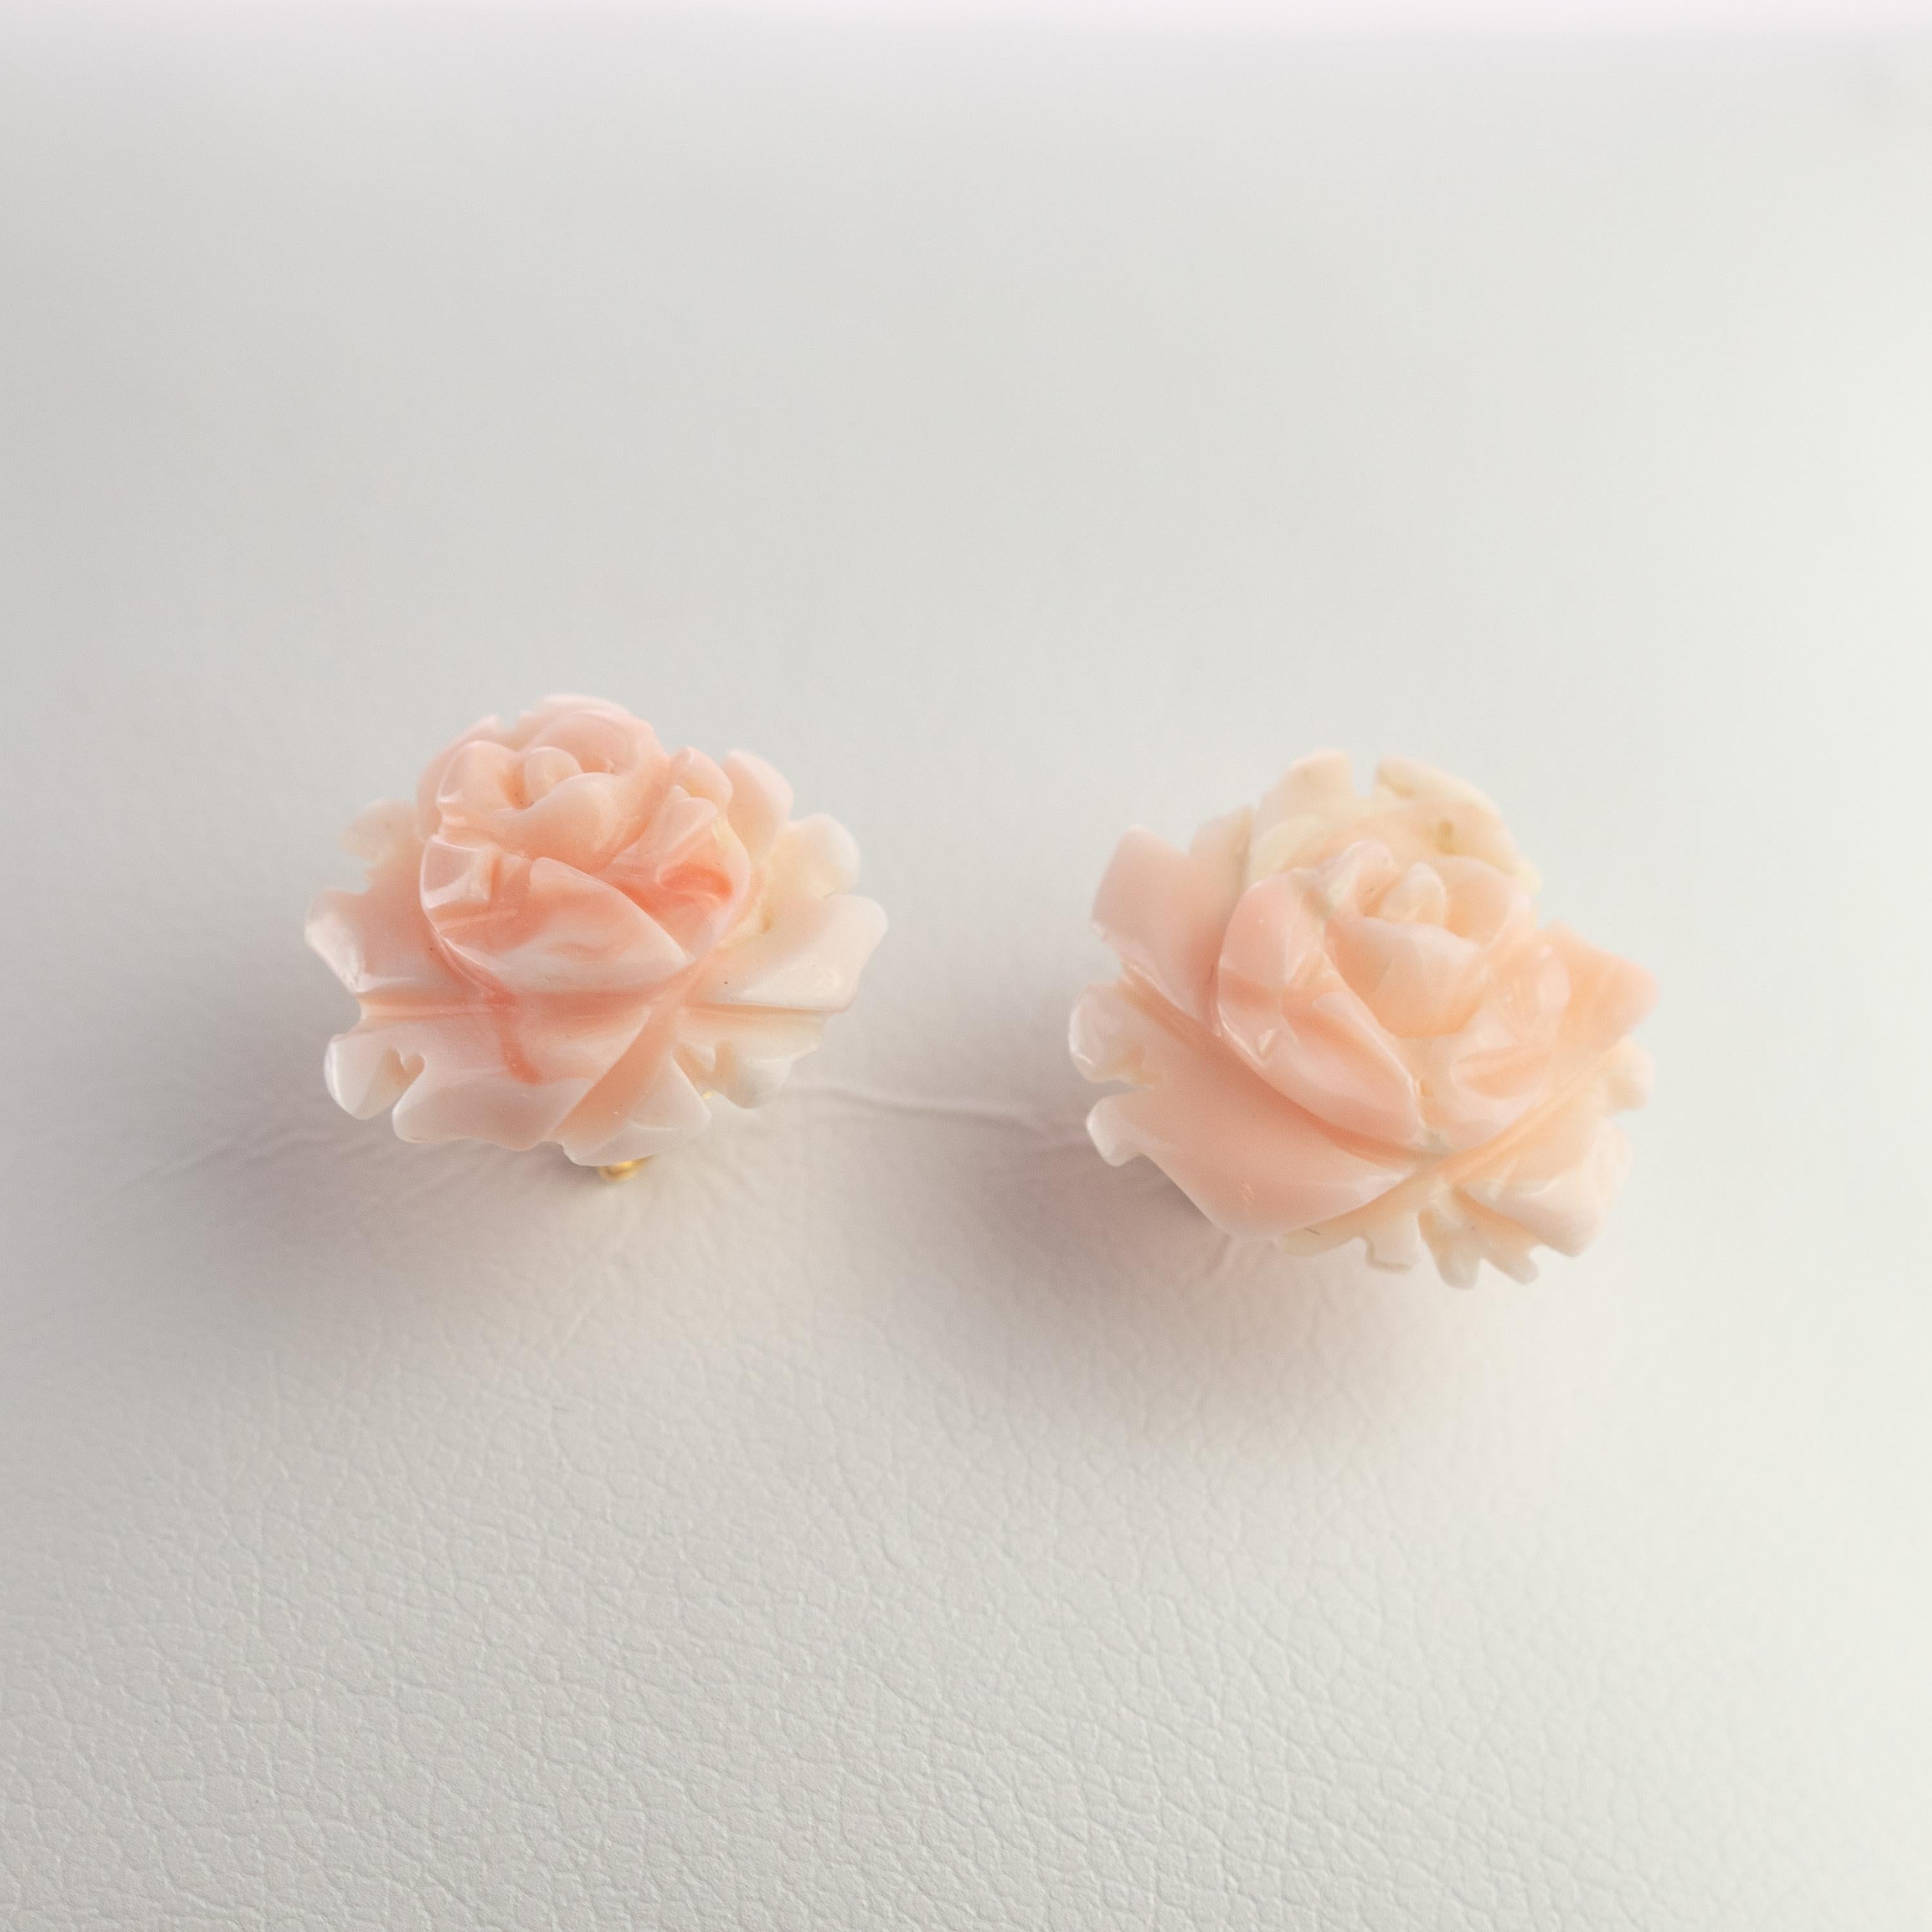 small pink rose earrings